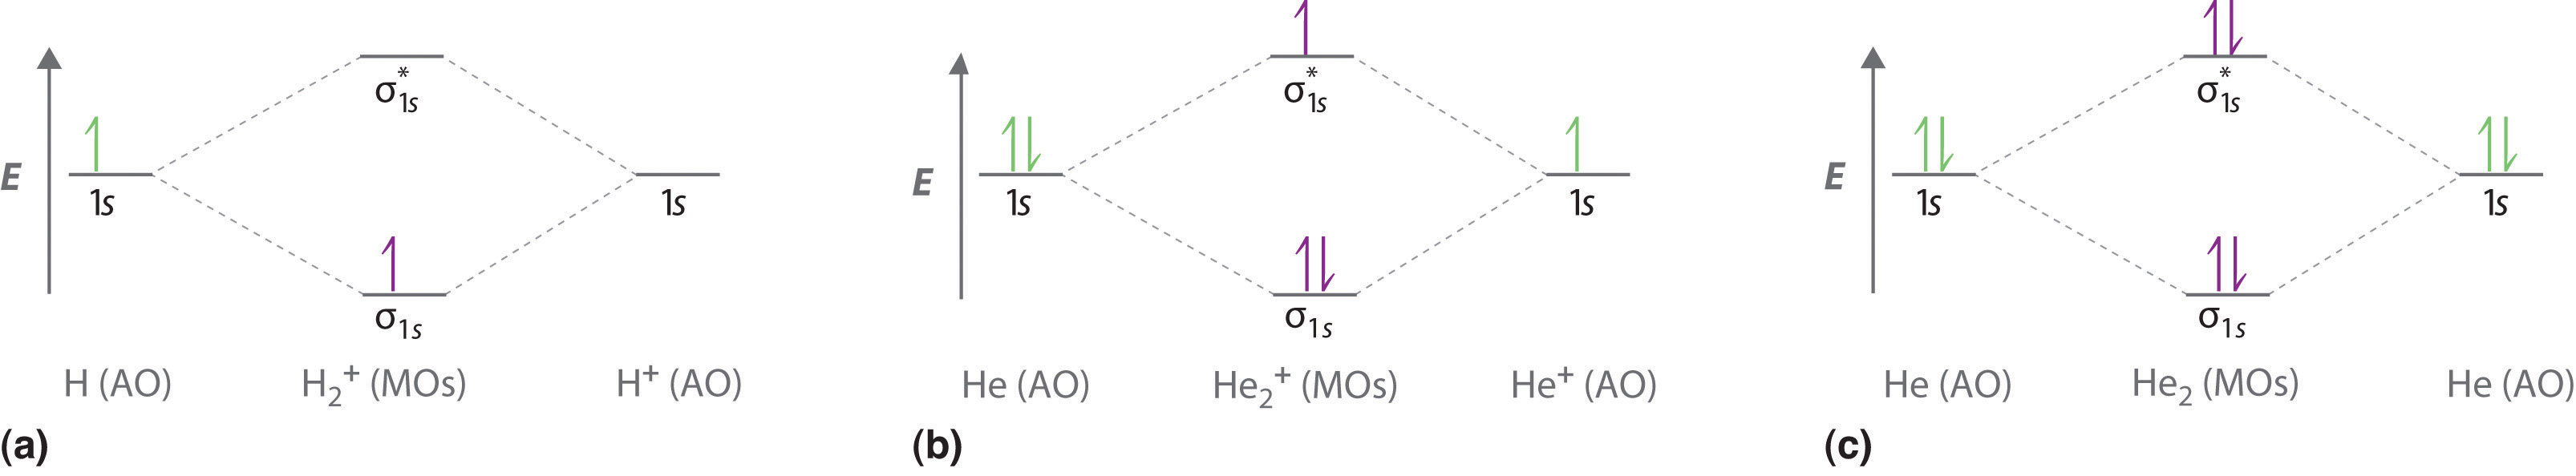 The MO orbital of H2+ has one electron in the bonding sigma 1s orbital. He2+ has two electrons in the bonding sigma 1s orbital and one electron in the antibonding sigma 1s orbital. He2 has two electrons in the bonding sigma 1s orbital and two electrons in the antibonding sigma 1s orbital.